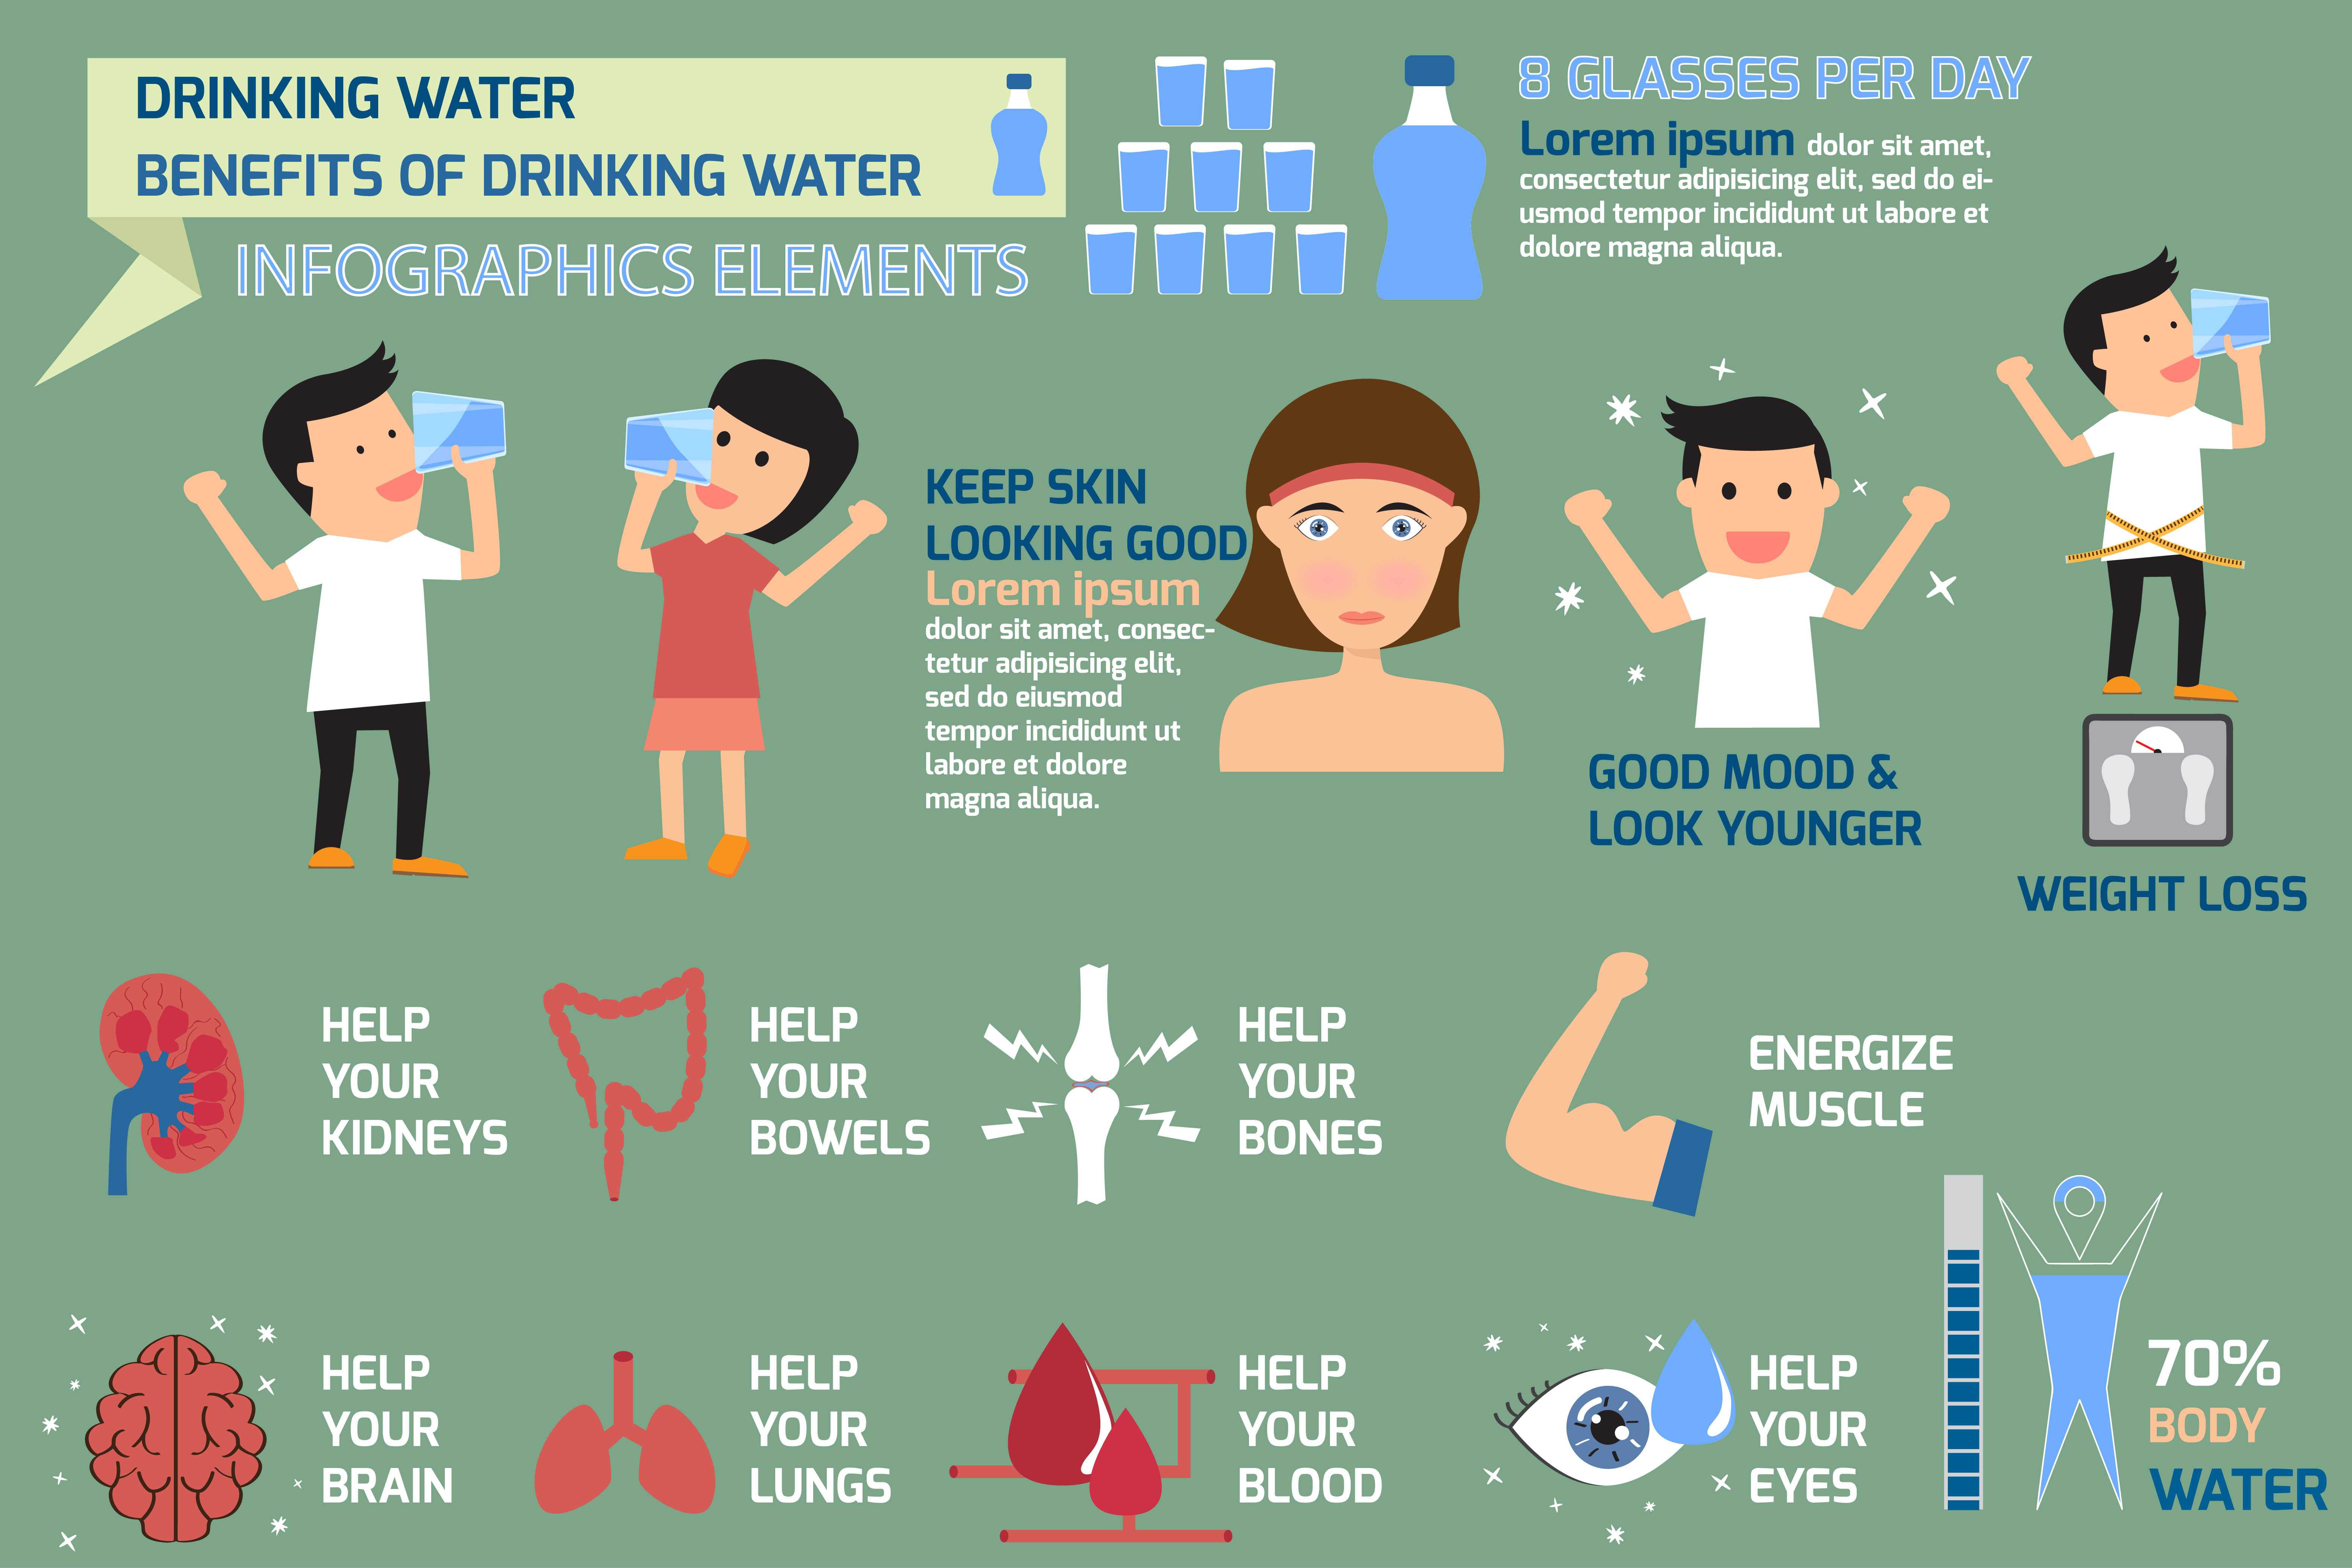 The health benefits of water